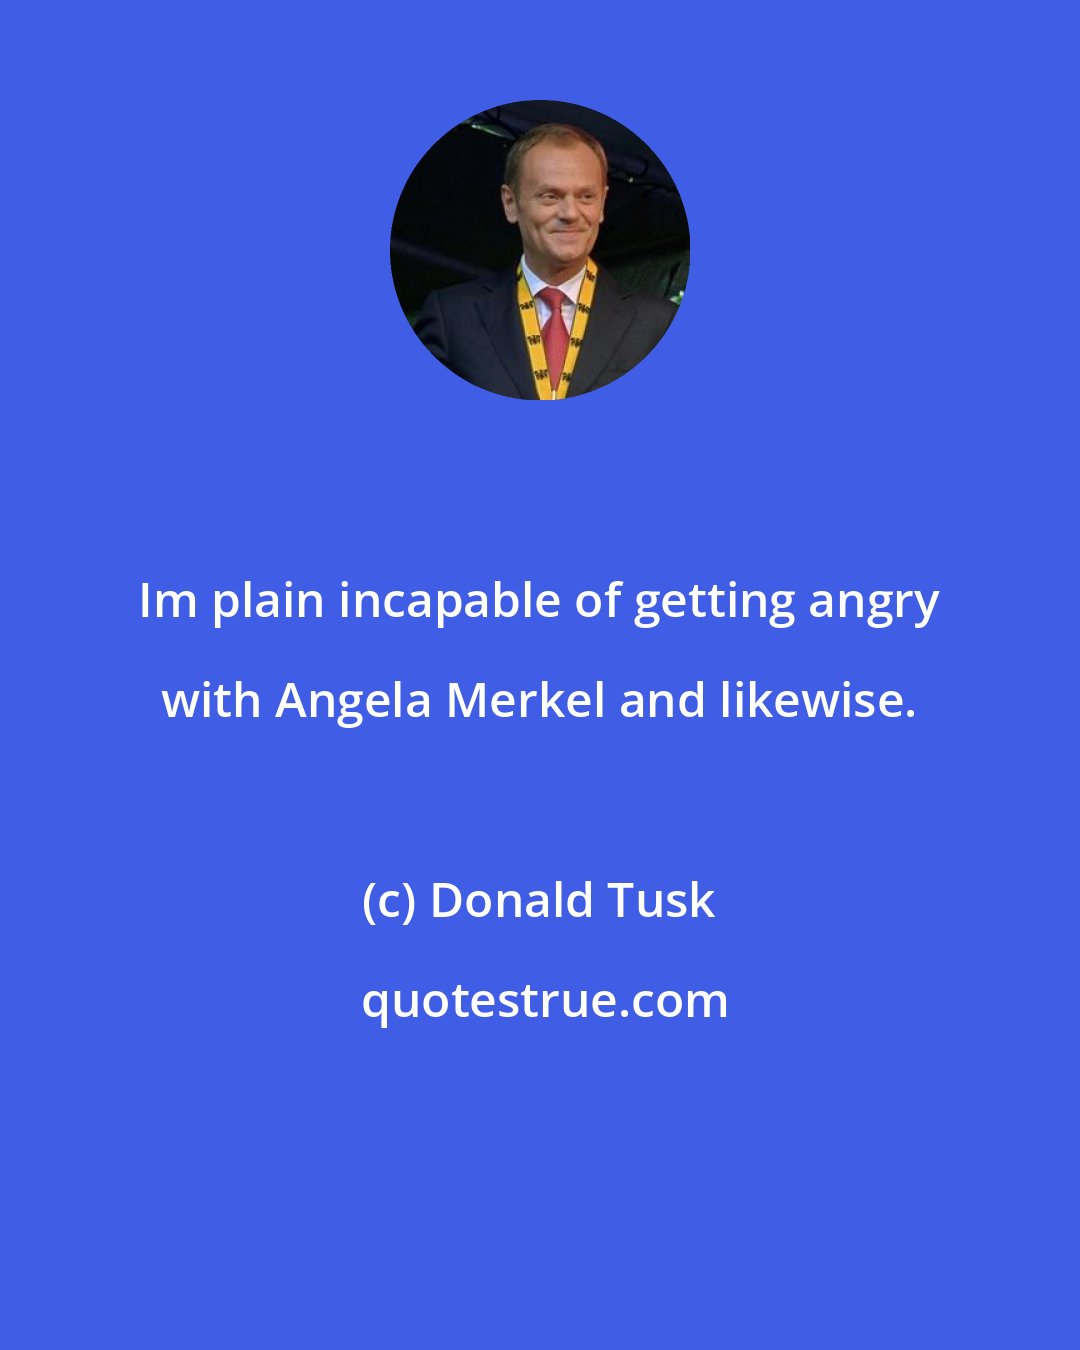 Donald Tusk: Im plain incapable of getting angry with Angela Merkel and likewise.